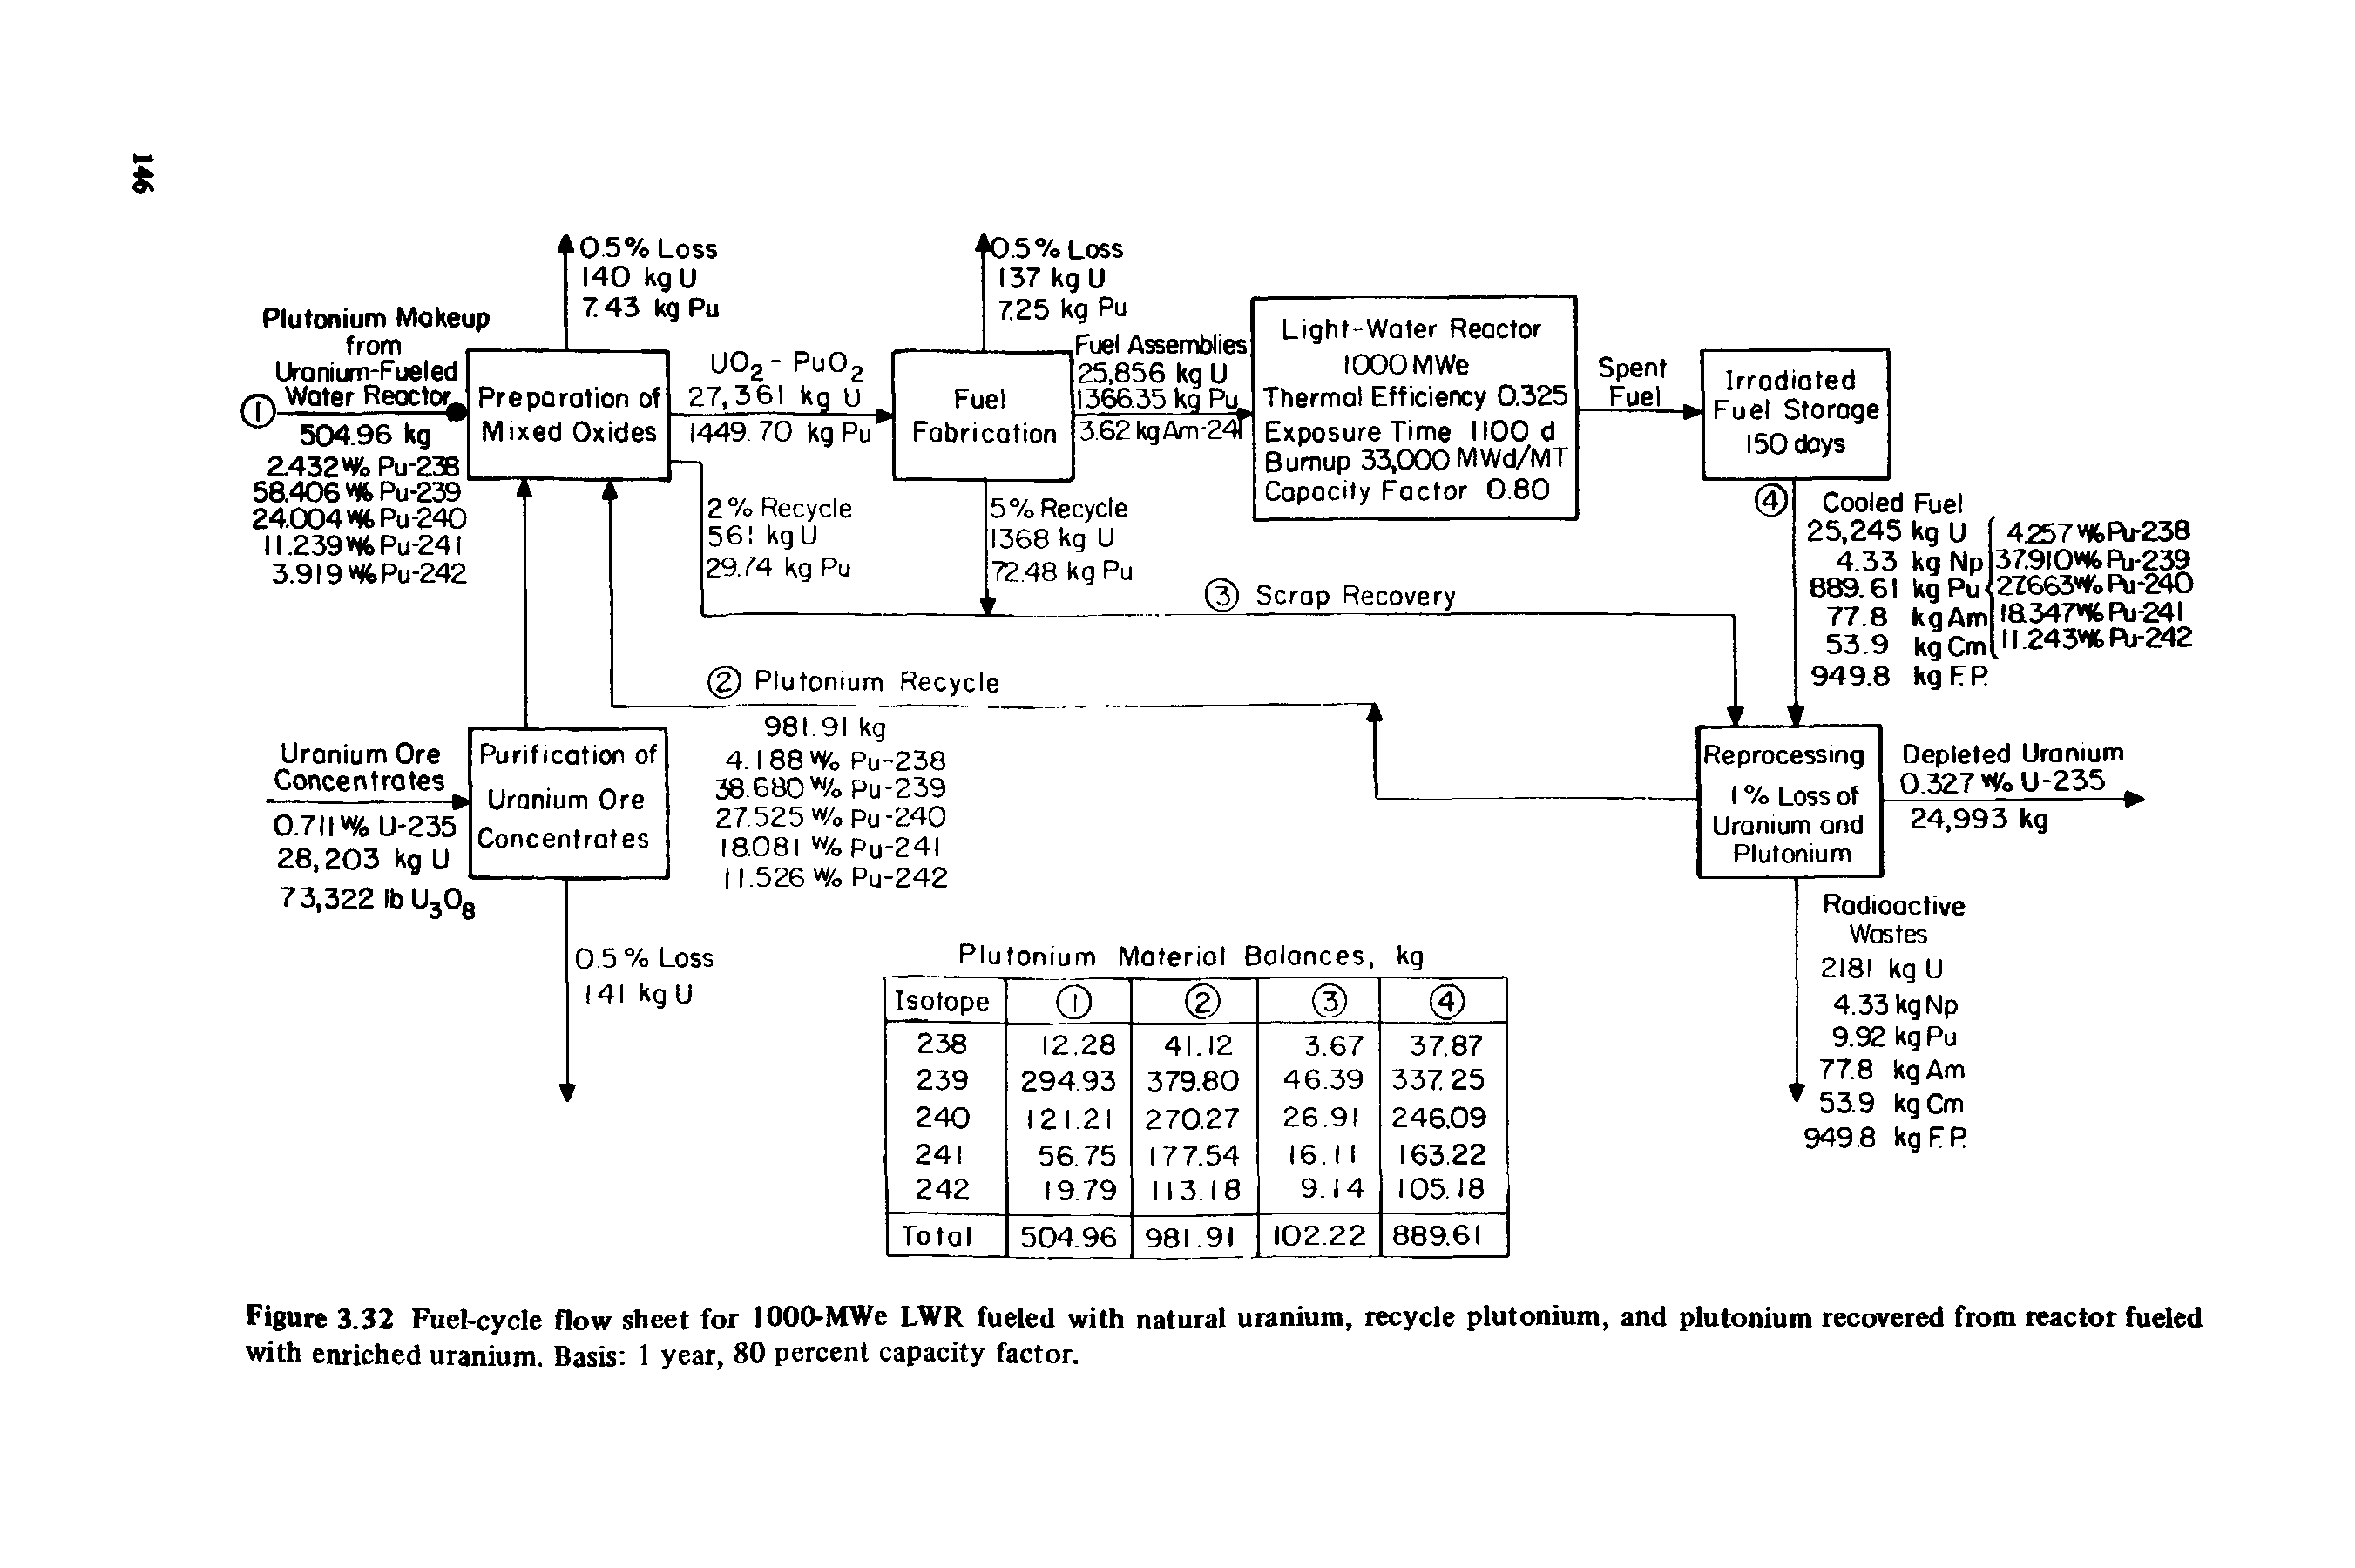 Figure 3.32 Fuel-cycle flow sheet for 1000-MWe LWR fueled with natural uranium, recycle plutonium, and plutonium recovered from reactor fueled with enriched uranium. Basis 1 year, 80 percent capacity factor.